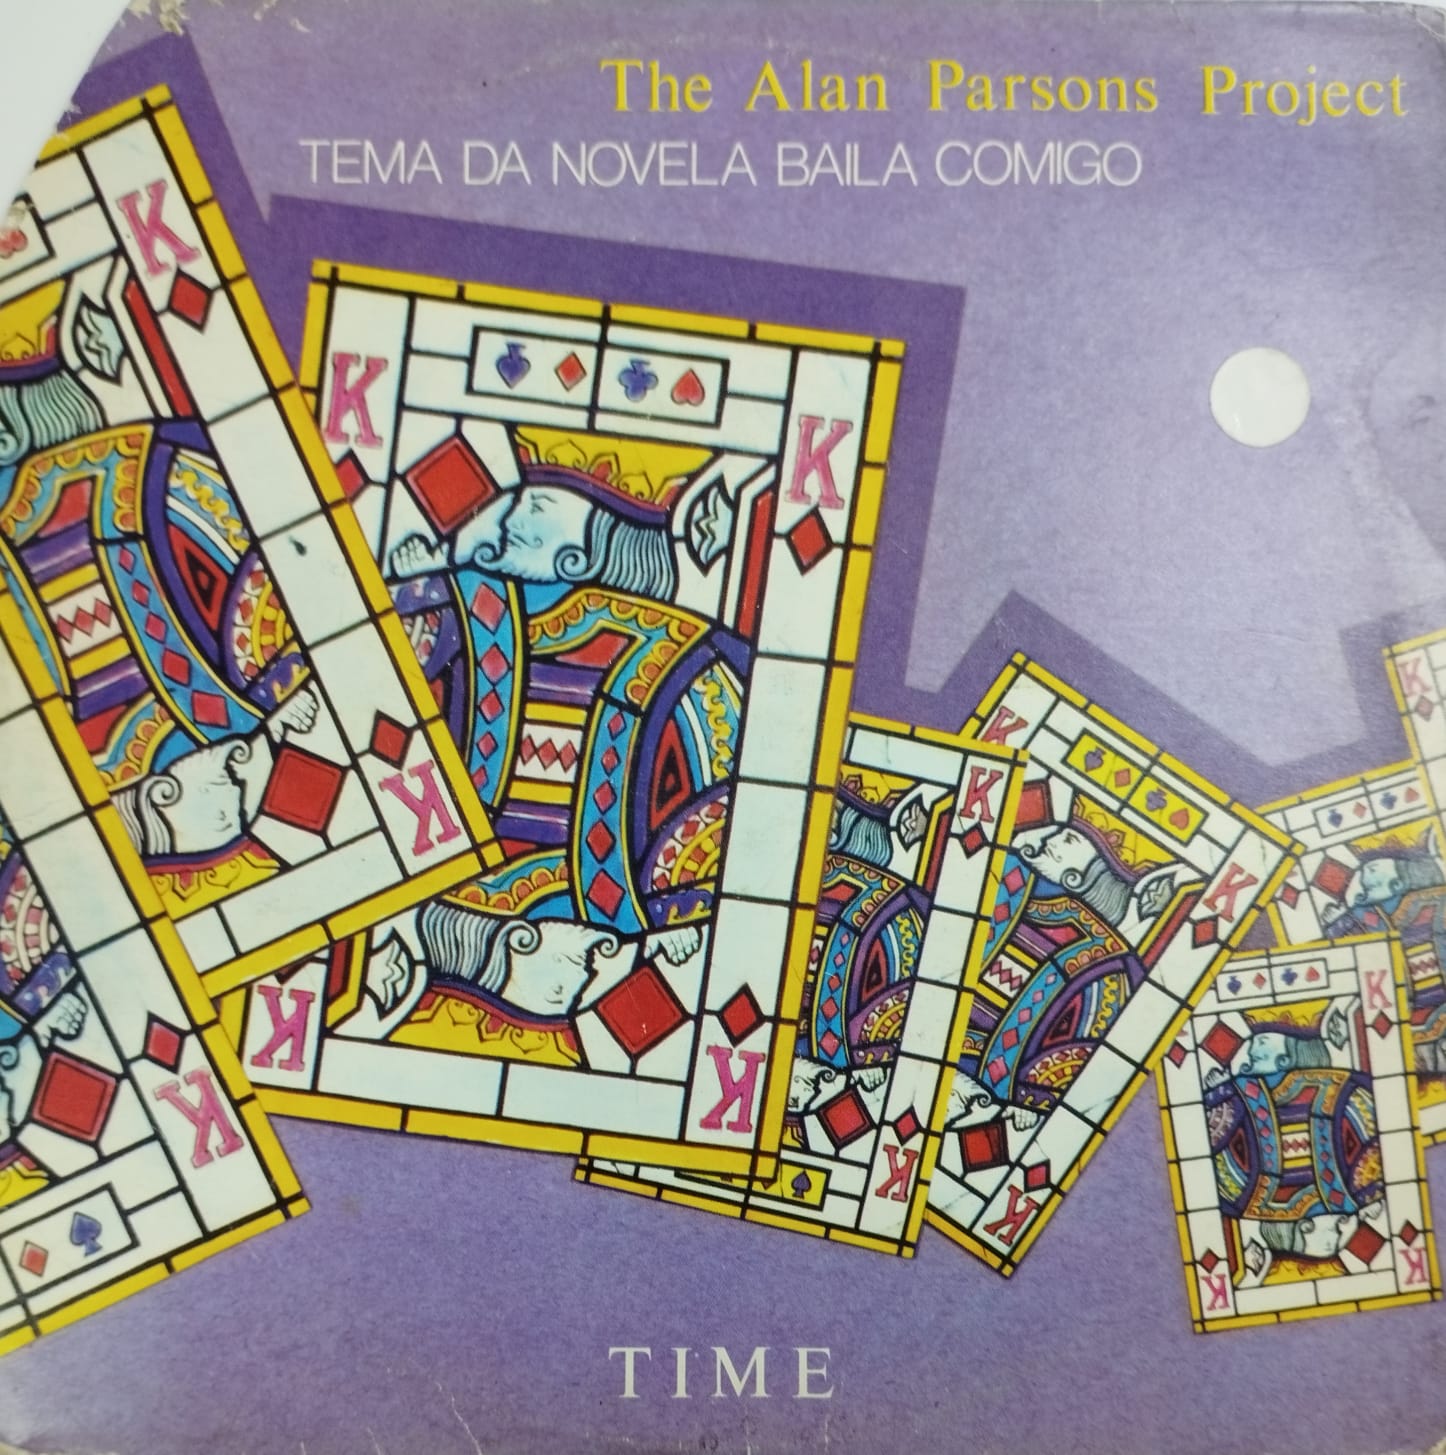 The Alan Parsons Project - Time (Compacto)